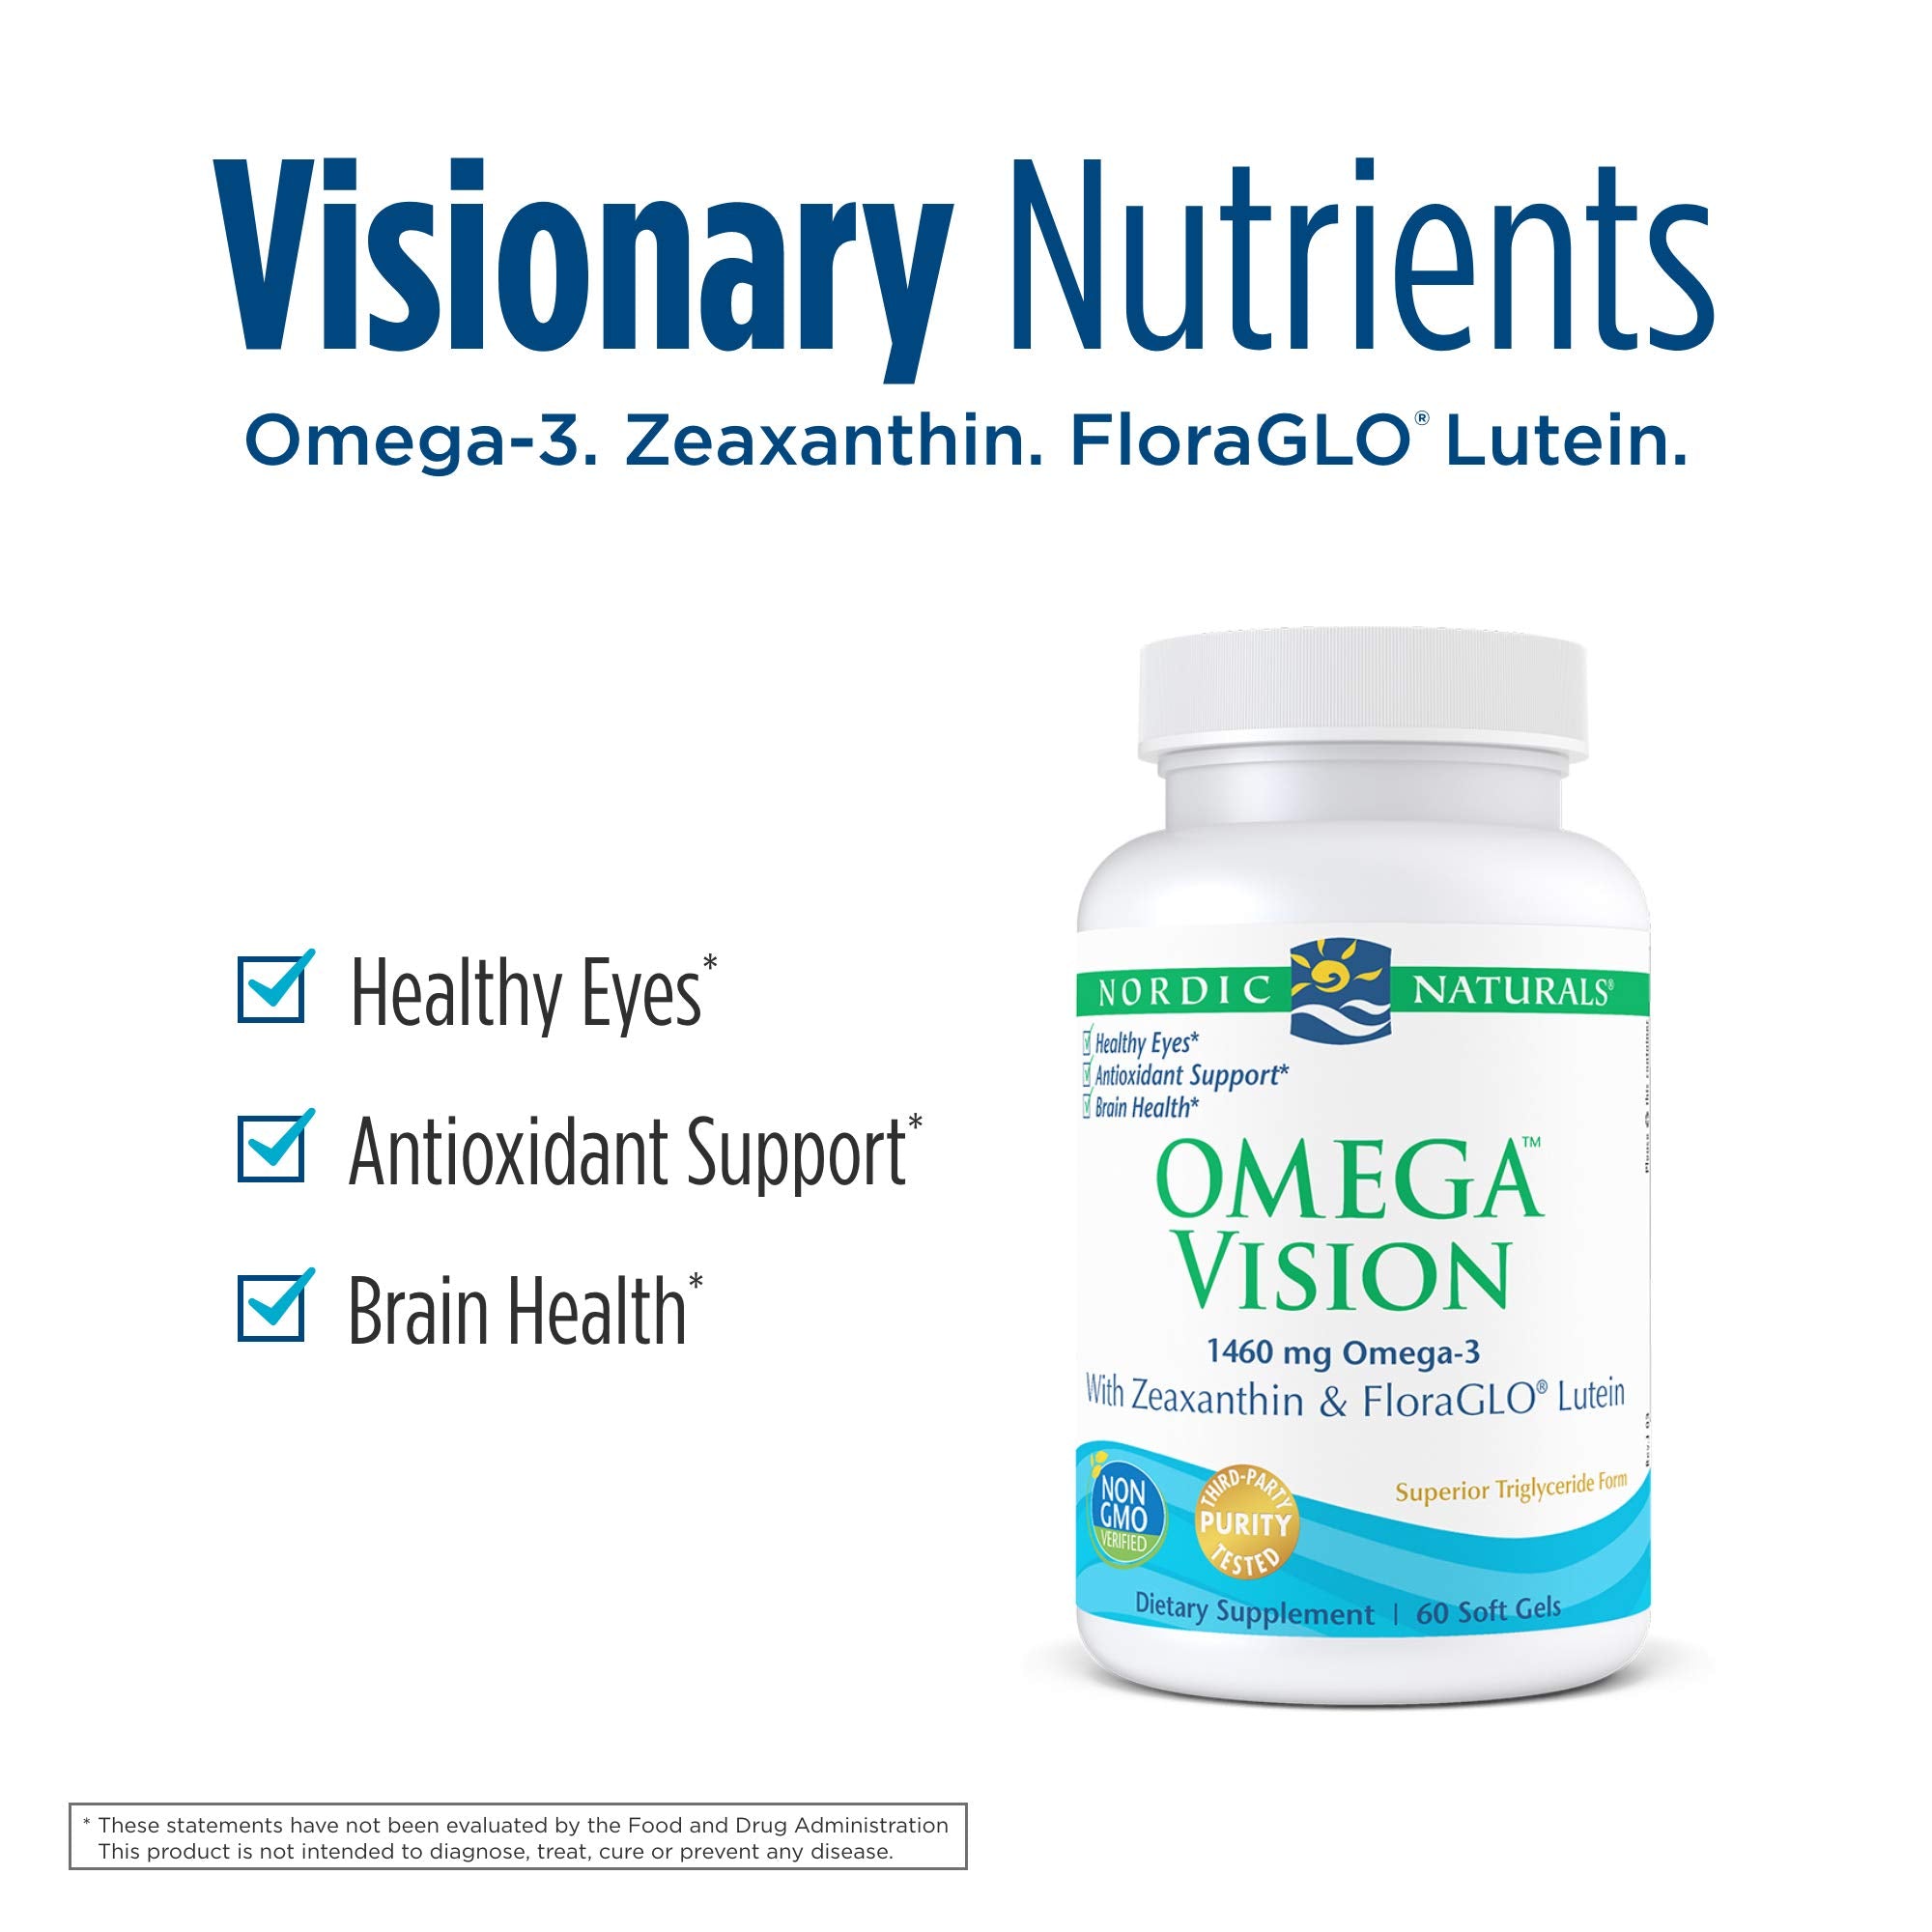 Nordic Naturals - Omega Vision, With Zeaxanthin & FloraGLO Lutein, 60 Soft Gels